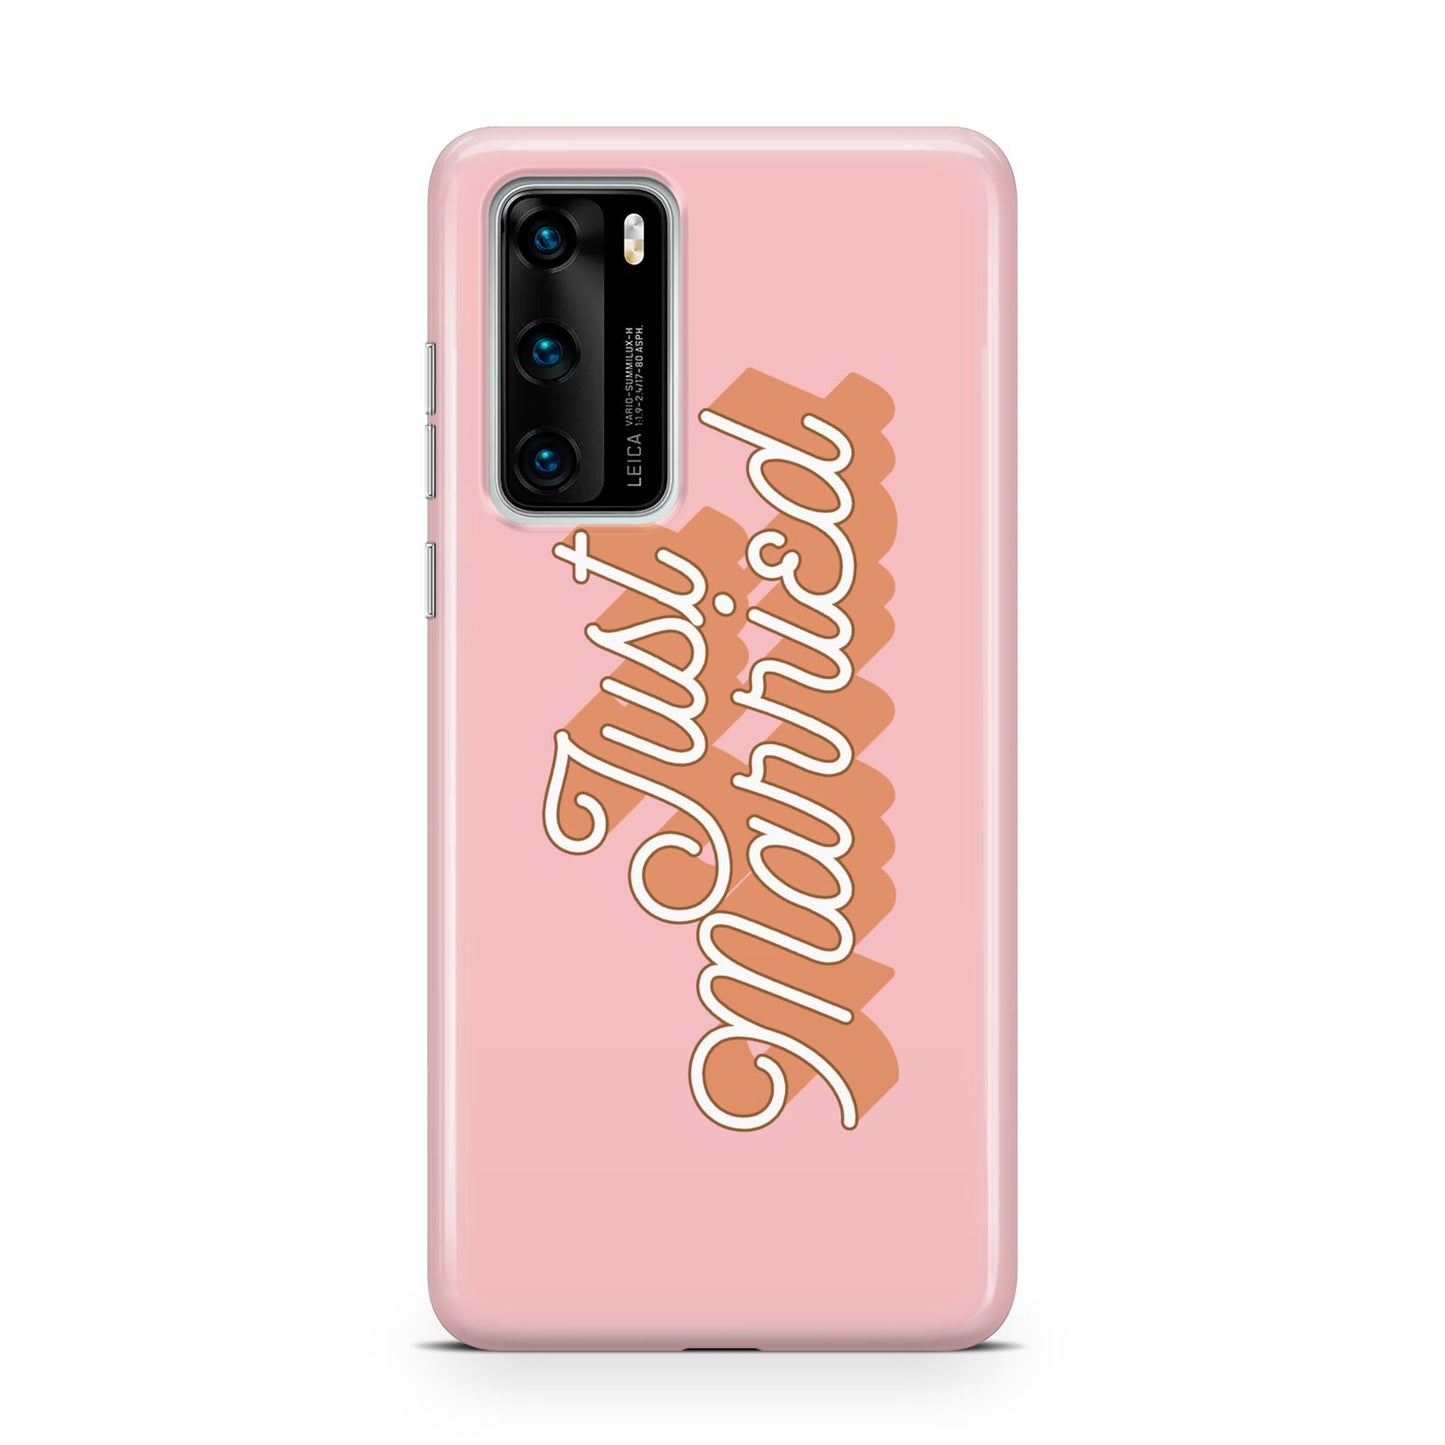 Just Married Pink Huawei P40 Phone Case